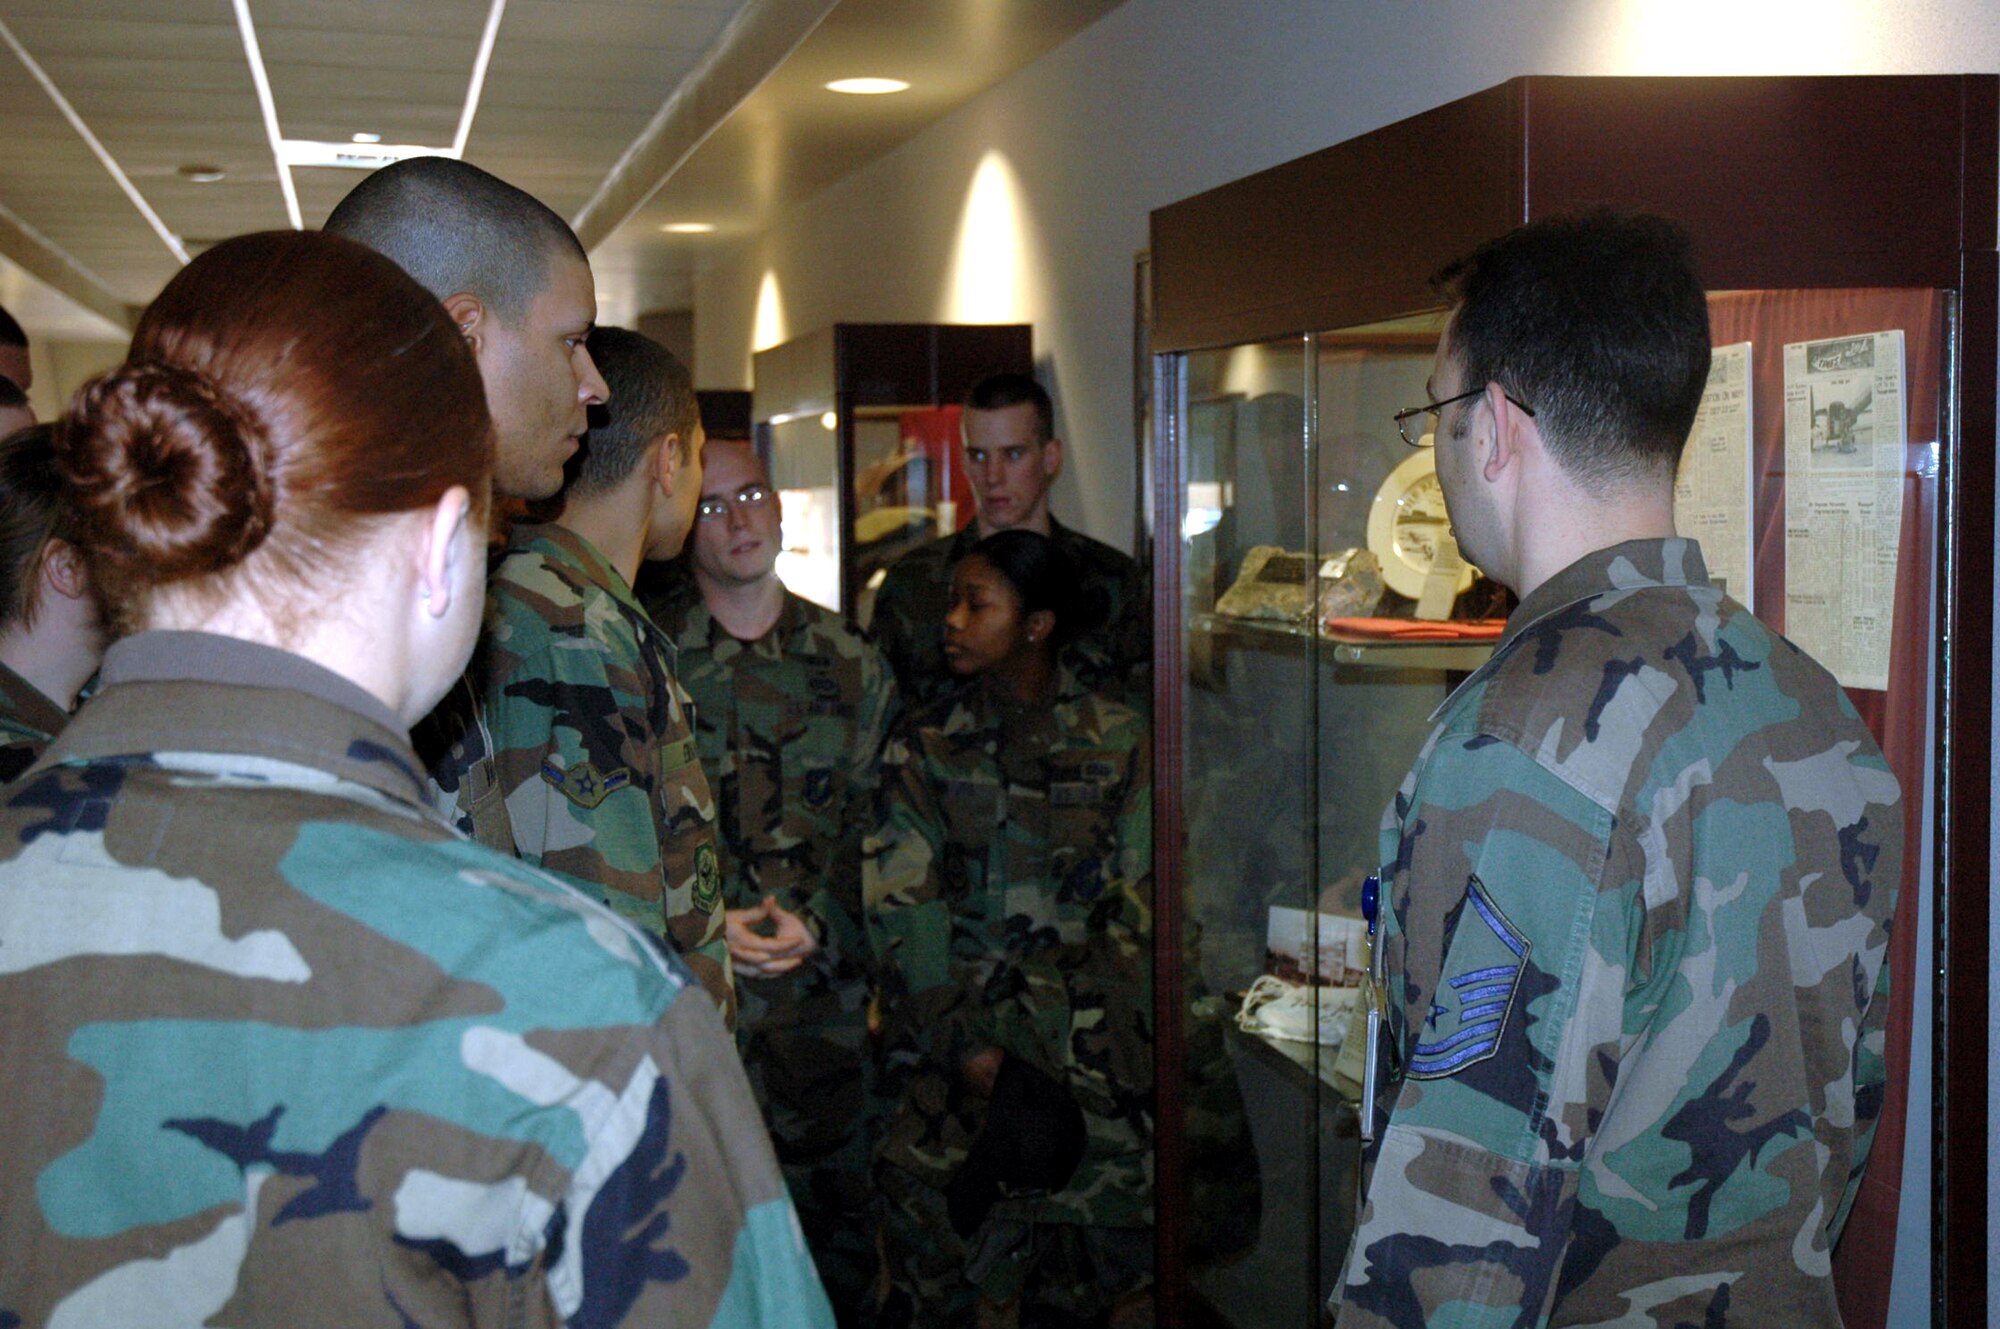 Master Sgt. Ben Rodriguez, U.S. Air Force Expeditionary Center's Mobility Operations School, talks to students from the McGuire Air Force Base, N.J., First Term Airman Center about one of the USAF EC's historical display cases Jan. 16 on Fort Dix, N.J.  The FTAC students toured the Center and learned more about its mission and people.  (U.S. Air Force Photo/Tech. Sgt. Scott T. Sturkol)